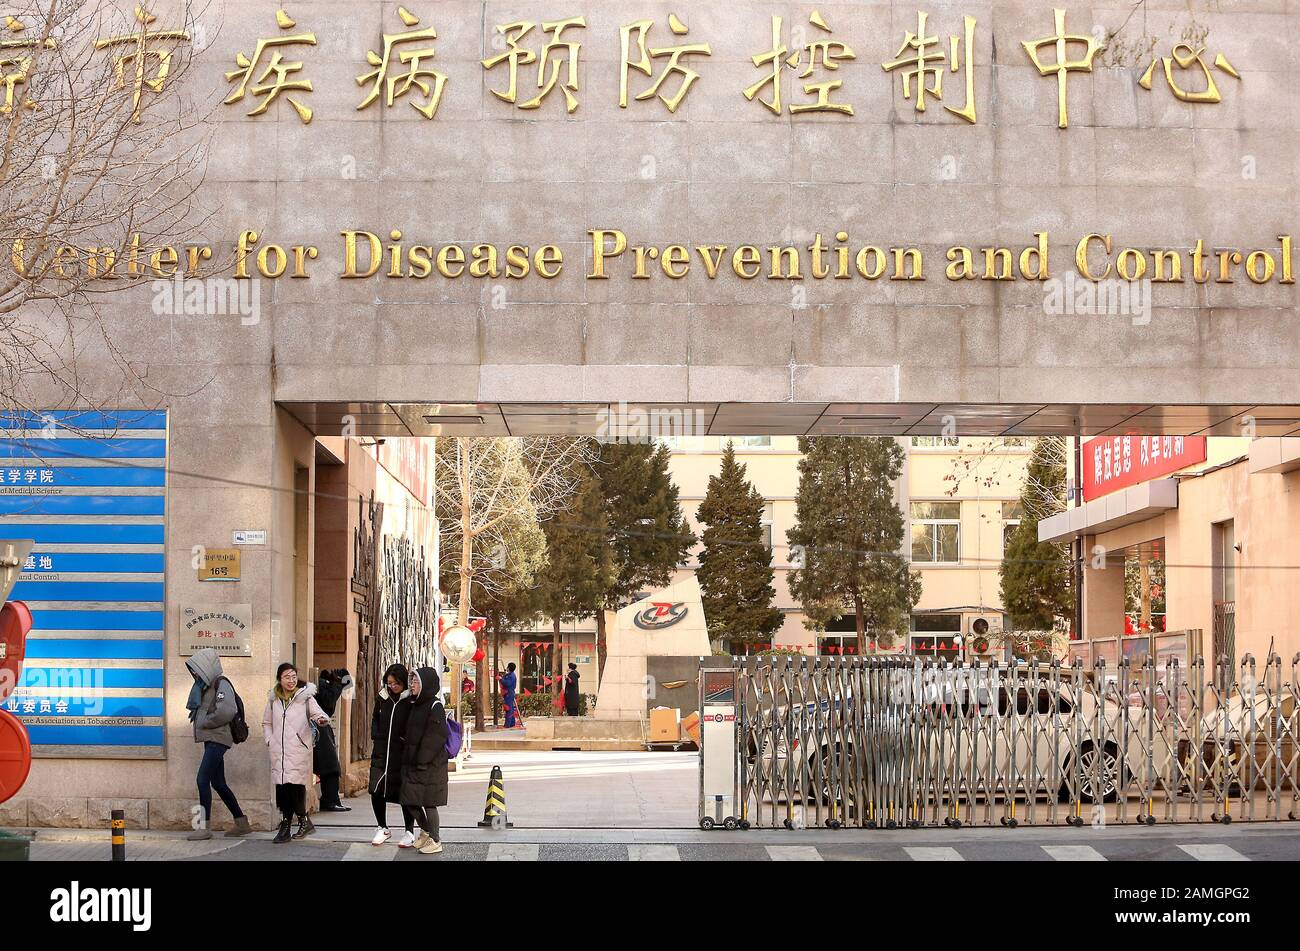 Beijing, China. 13th Jan, 2020. A main Chinese center for disease control, prevention and research is open in Beijing on Monday, January 13, 2020. Health authorities in China reported the country's first death from a new type of coronavirus, as the country braces for the Lunar New Year travel boom amid concerns over a possible outbreak similar to that of the SARS virus in the early 2000s. Photo by Stephen Shaver/UPI Credit: UPI/Alamy Live News Stock Photo